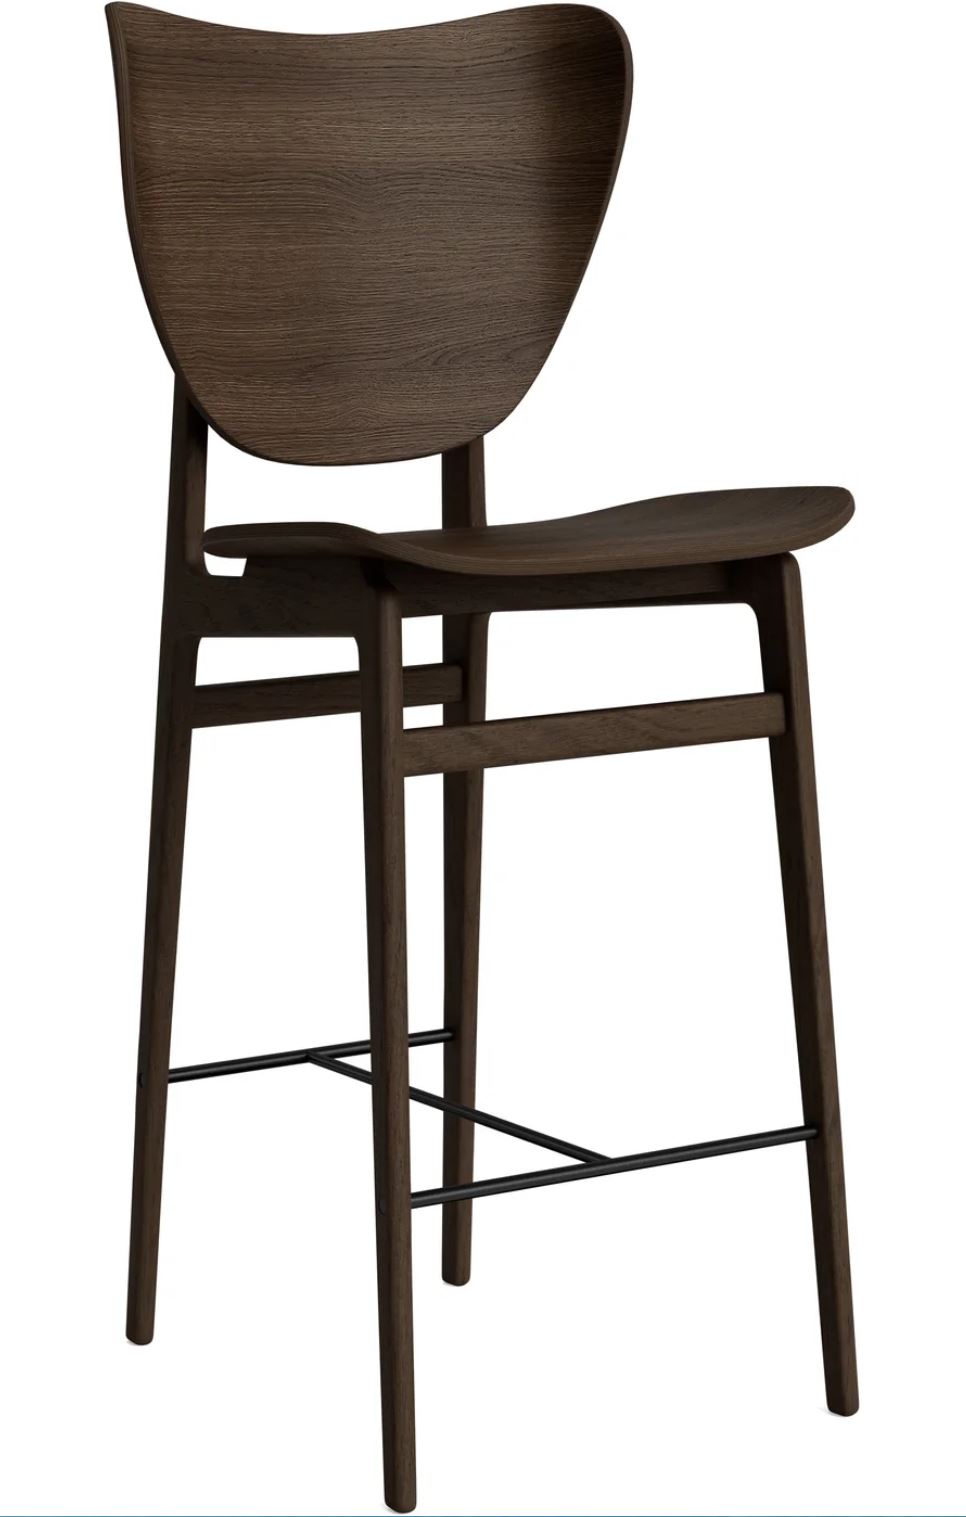 ELEPHANT BAR CHAIR UN-UPHOLSTERED BY NORR11 $2,150.00